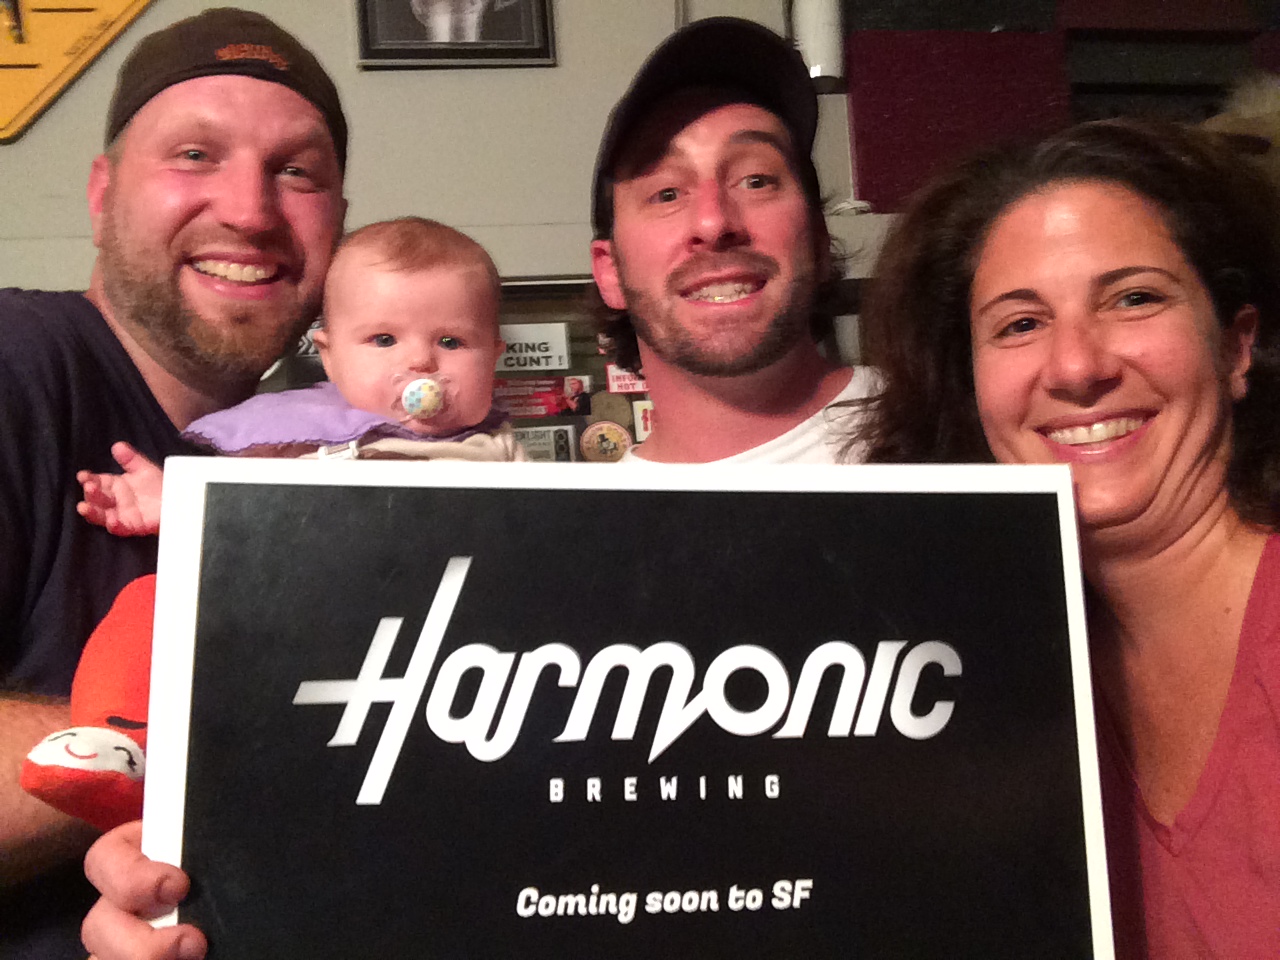 The Audra Show #6: Harmonic Brewing